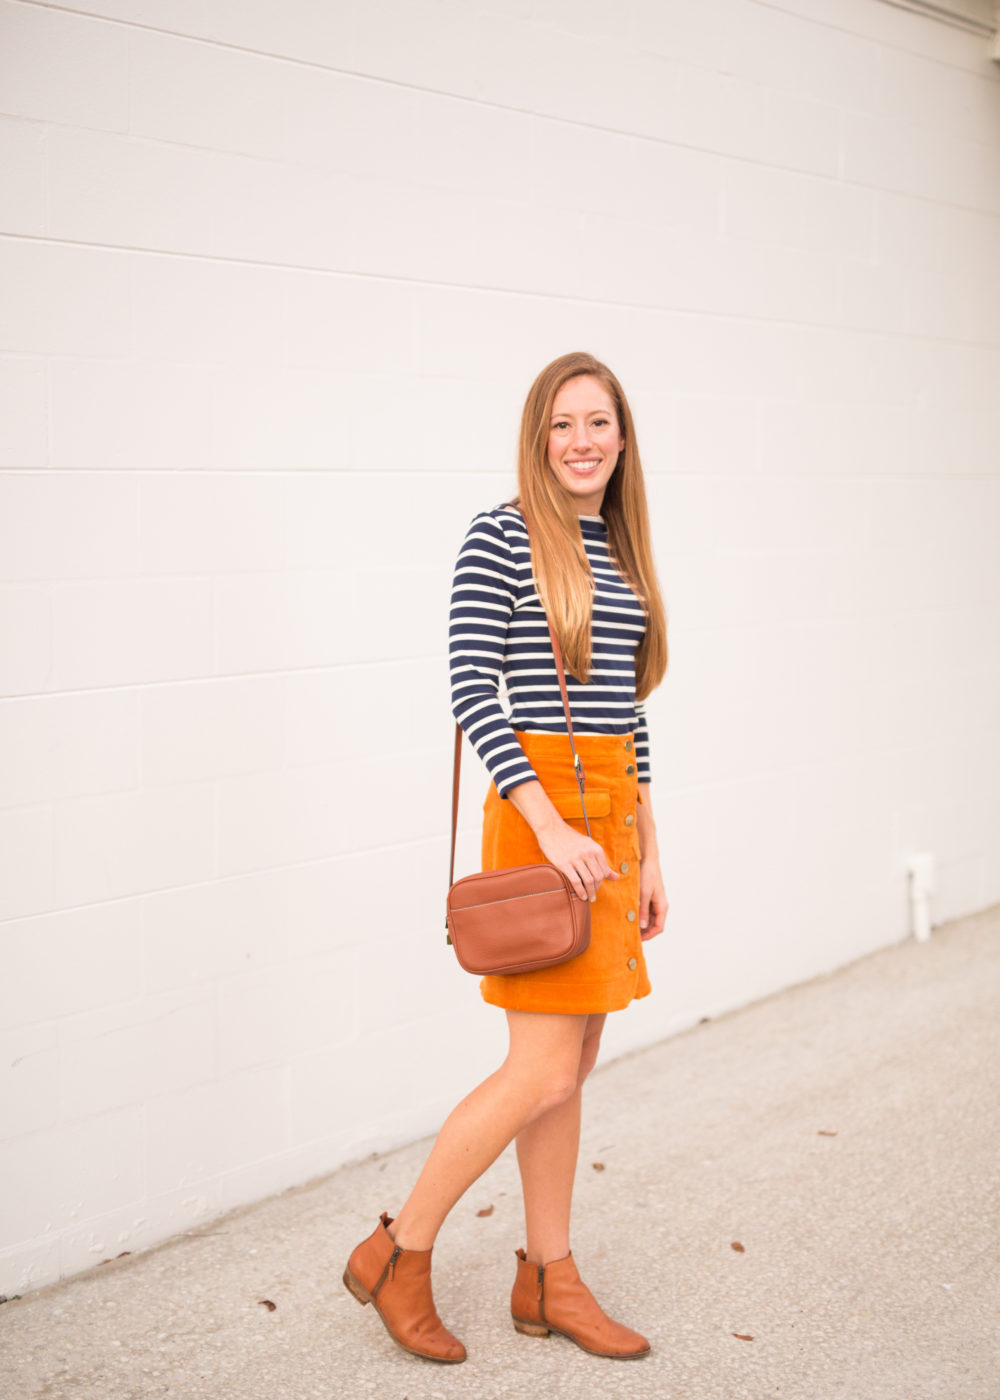 4 Must Have Fall Wardrobe Staples - Striped Shirt, Corduroy Skirt, Ankle Booties and Leather Bag | Sunshine Style